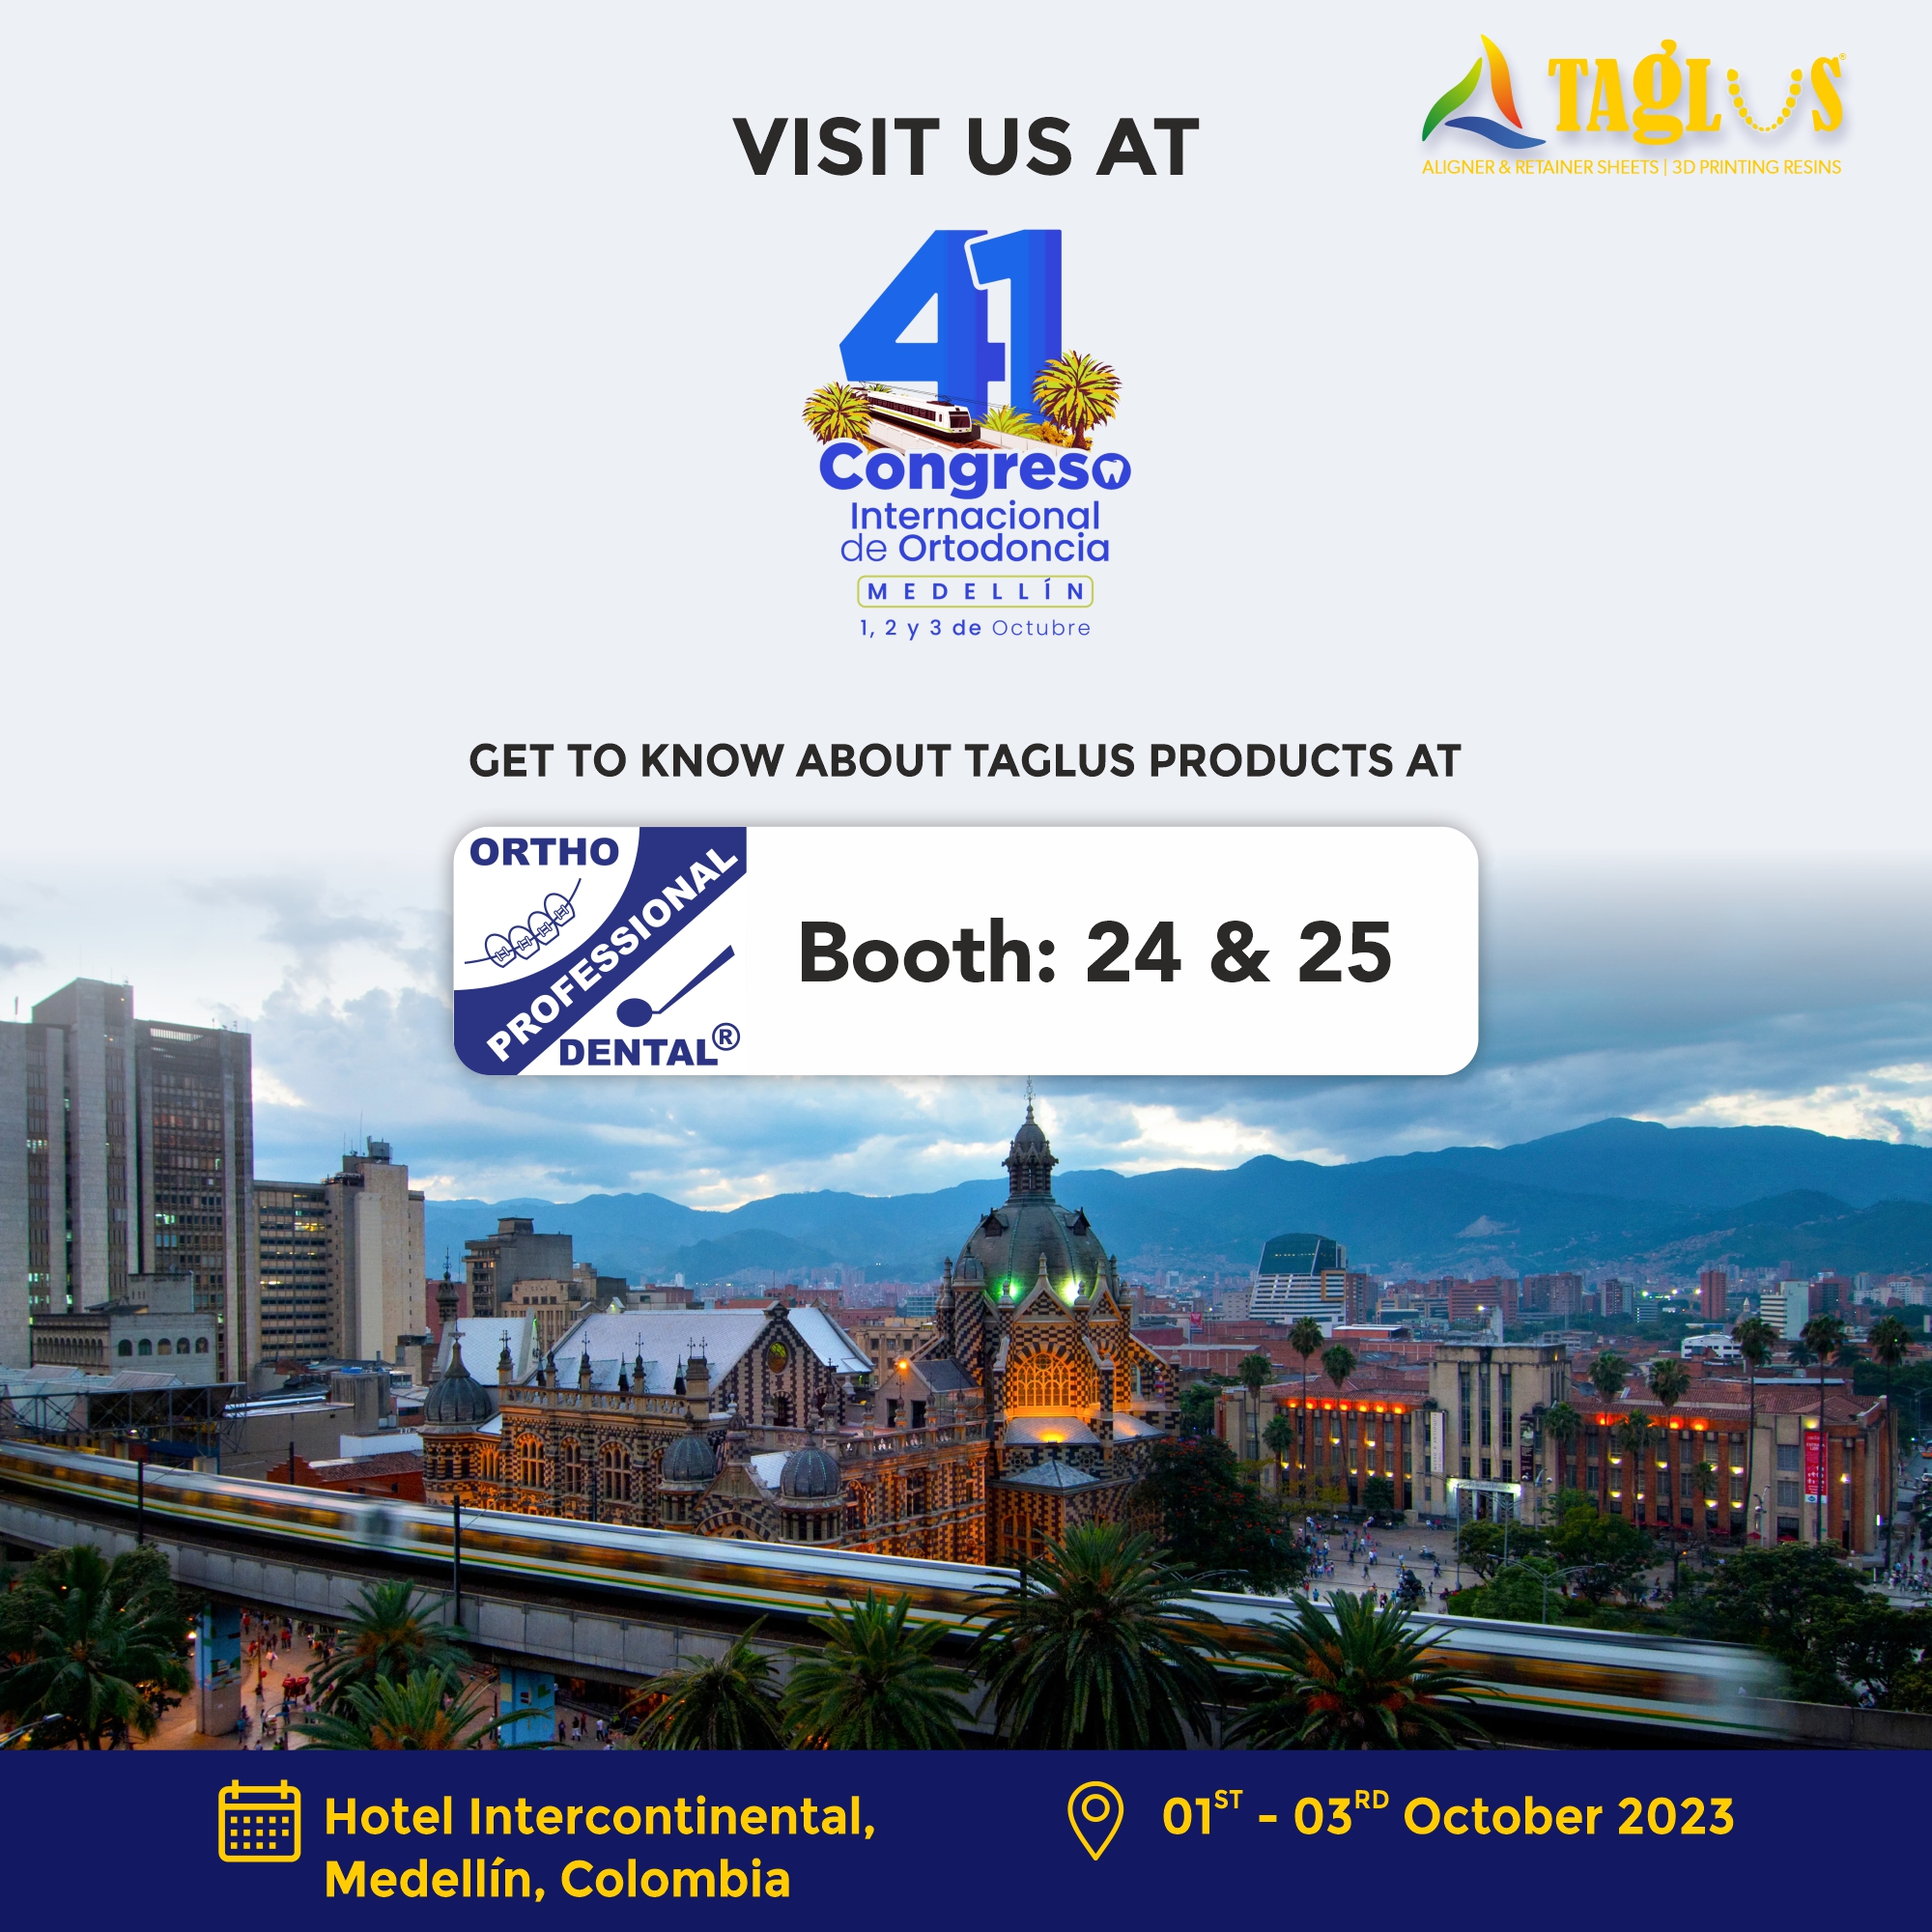 Find Us at Booths 24 & 25 - Hotel Intercontinental, Medellin, Colombia